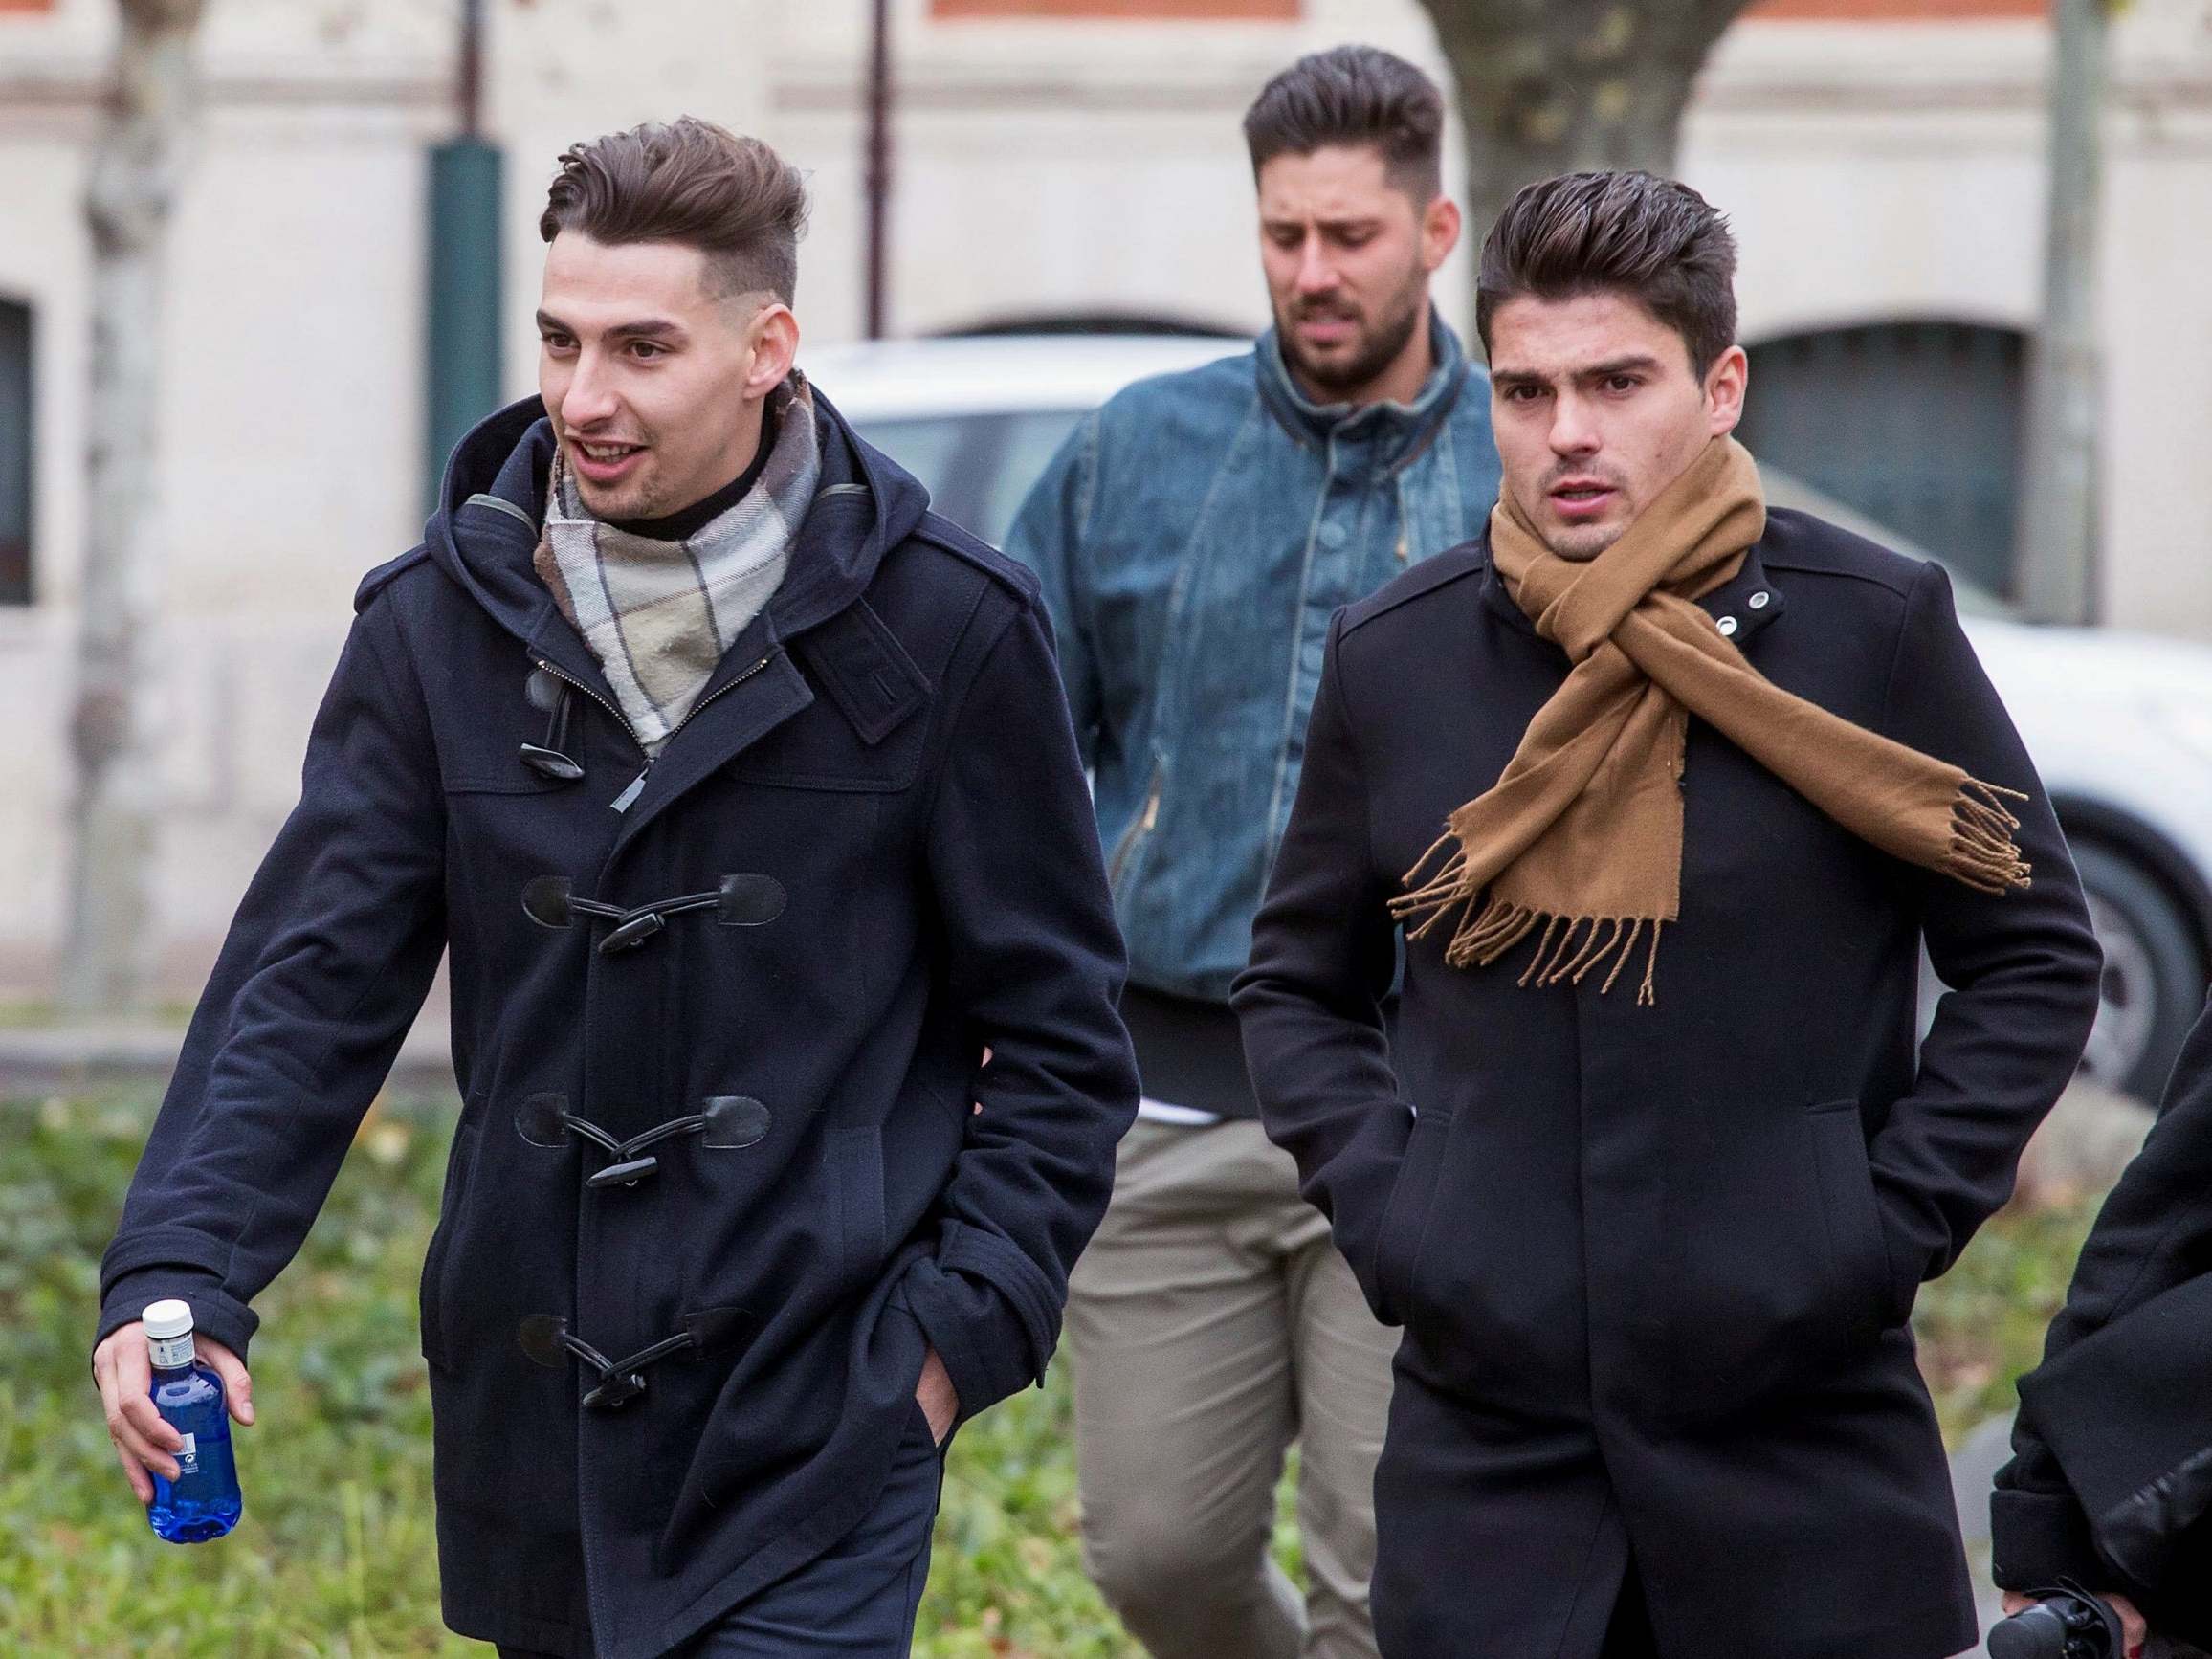 Former Spanish footballers (L-R) Carlos Cuadrado, Victor Rodriguez, and Raul Calvo who were jailed on 12 December 2019 for sexually assaulting a 15-year-old girl in 2017.